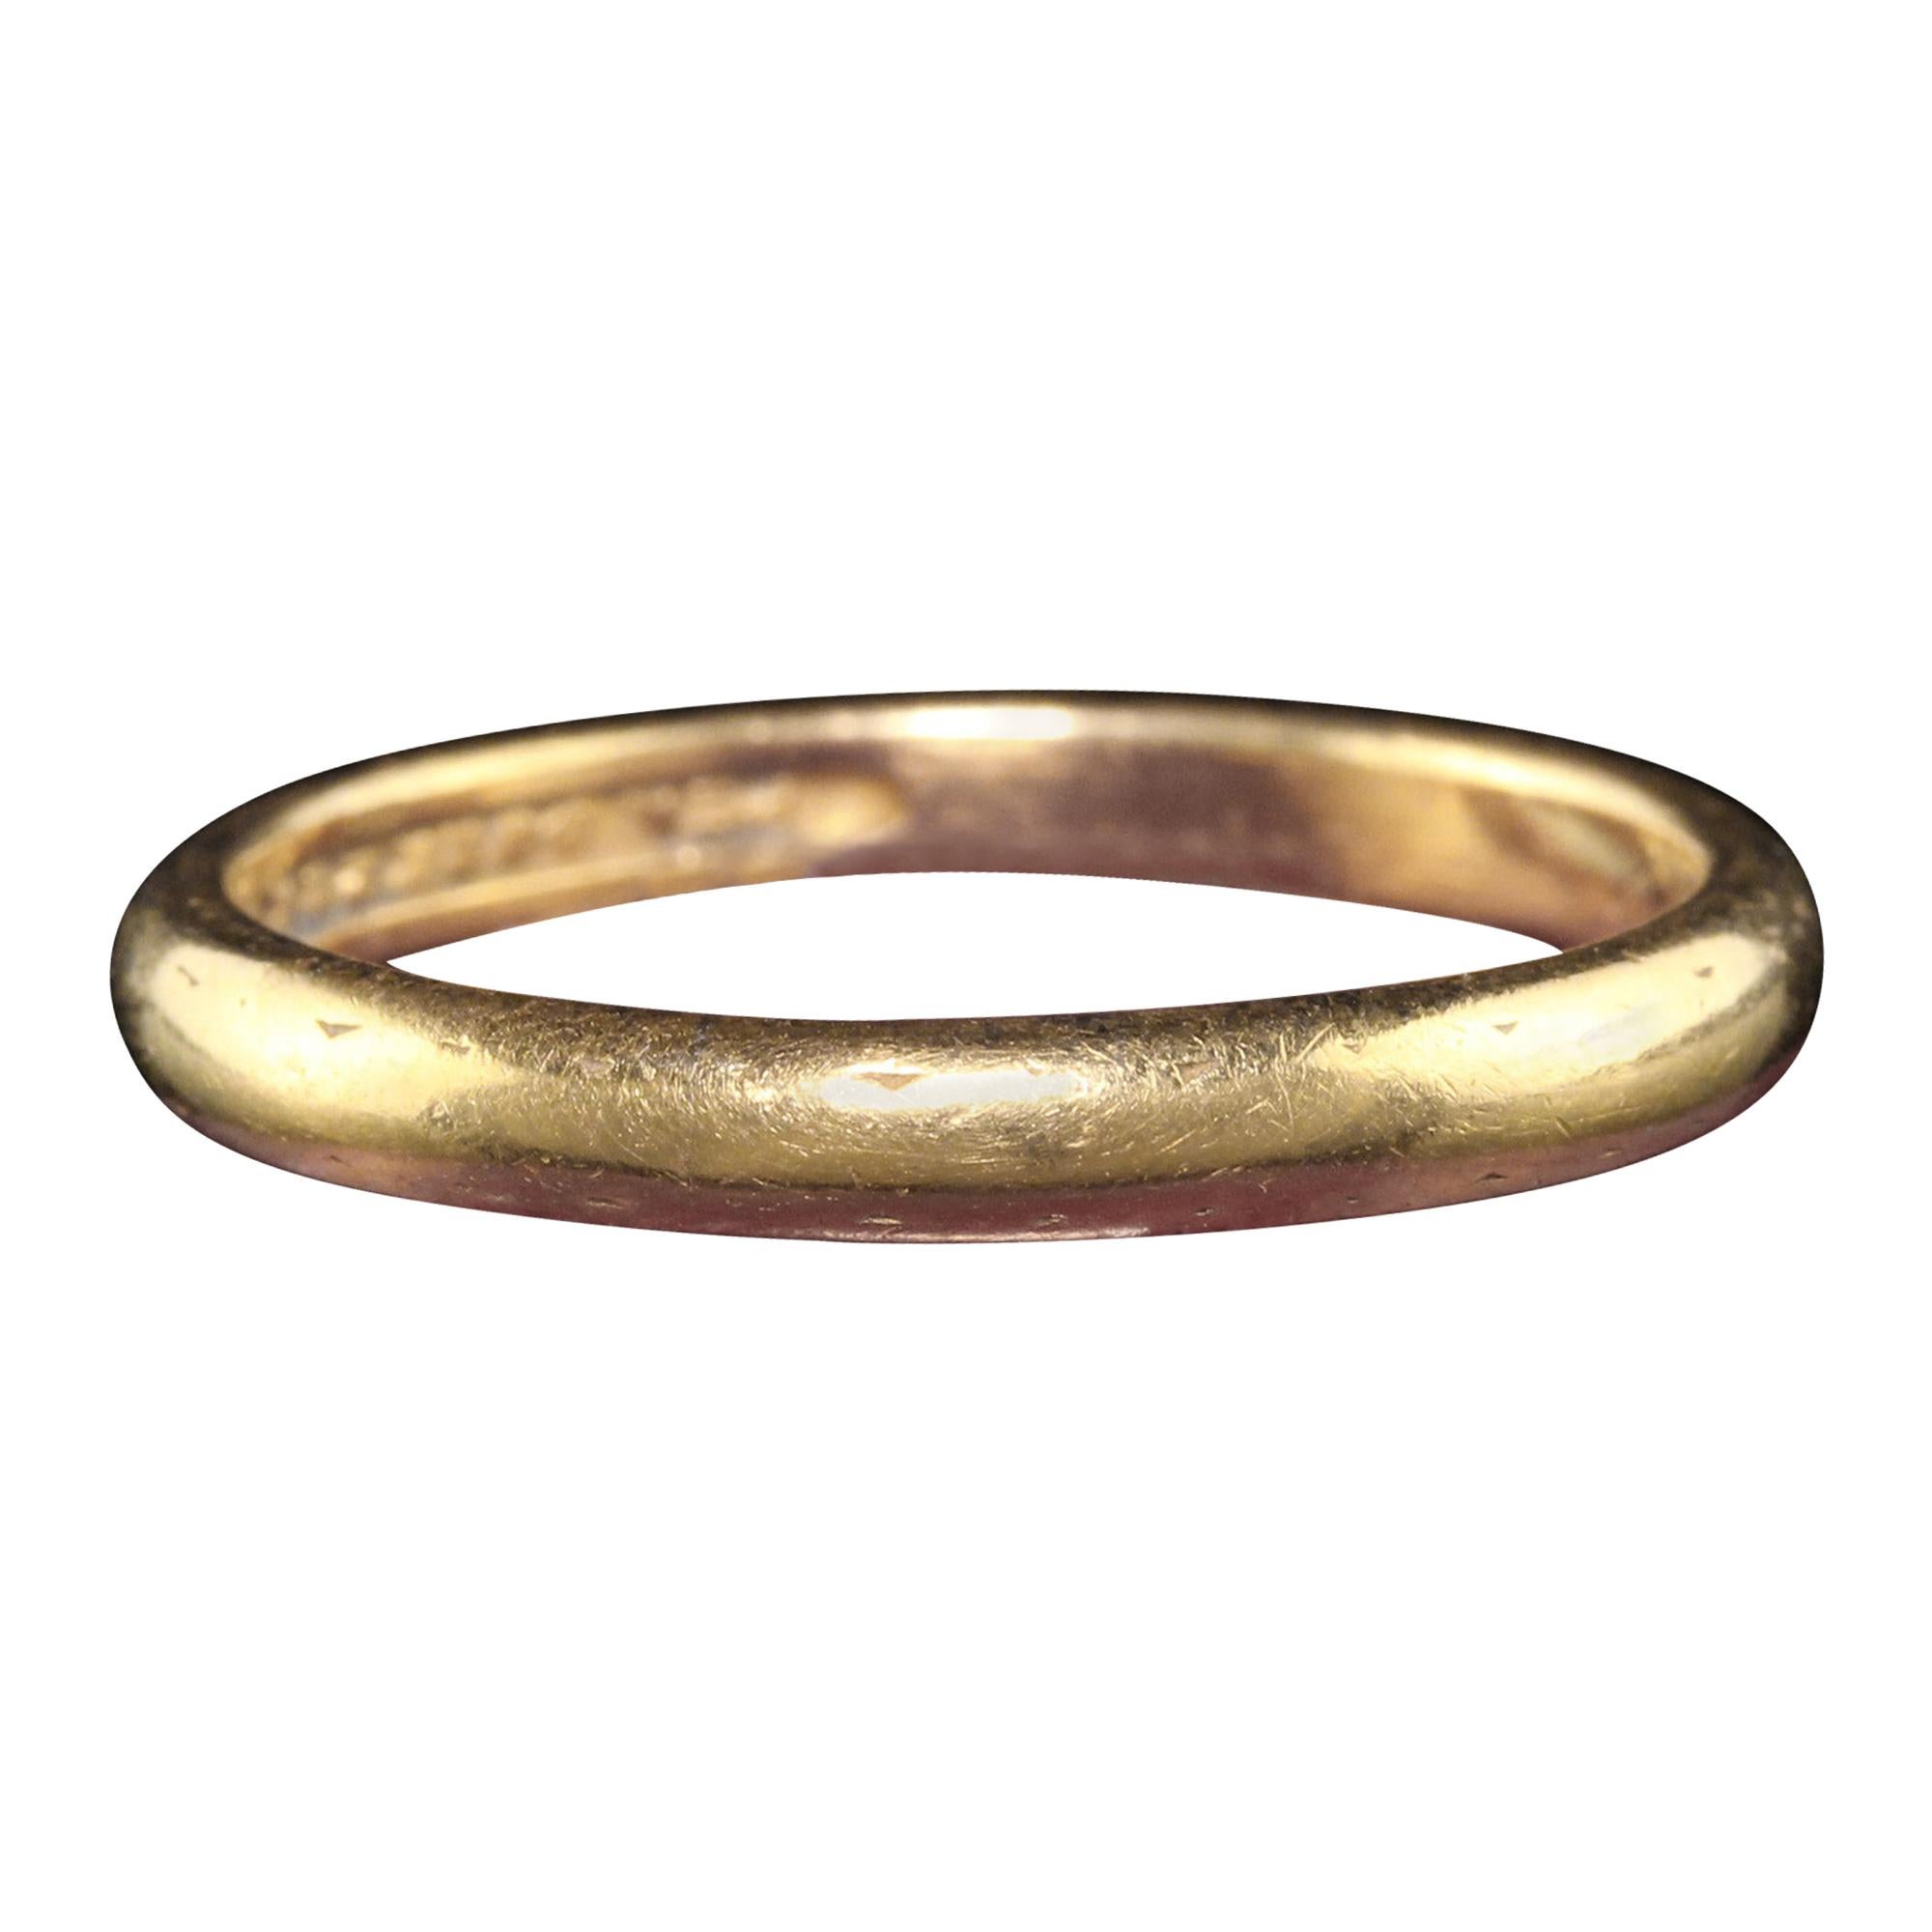 Antique Art Deco Peacock 22K Yellow Gold Engraved Classic Wedding Band